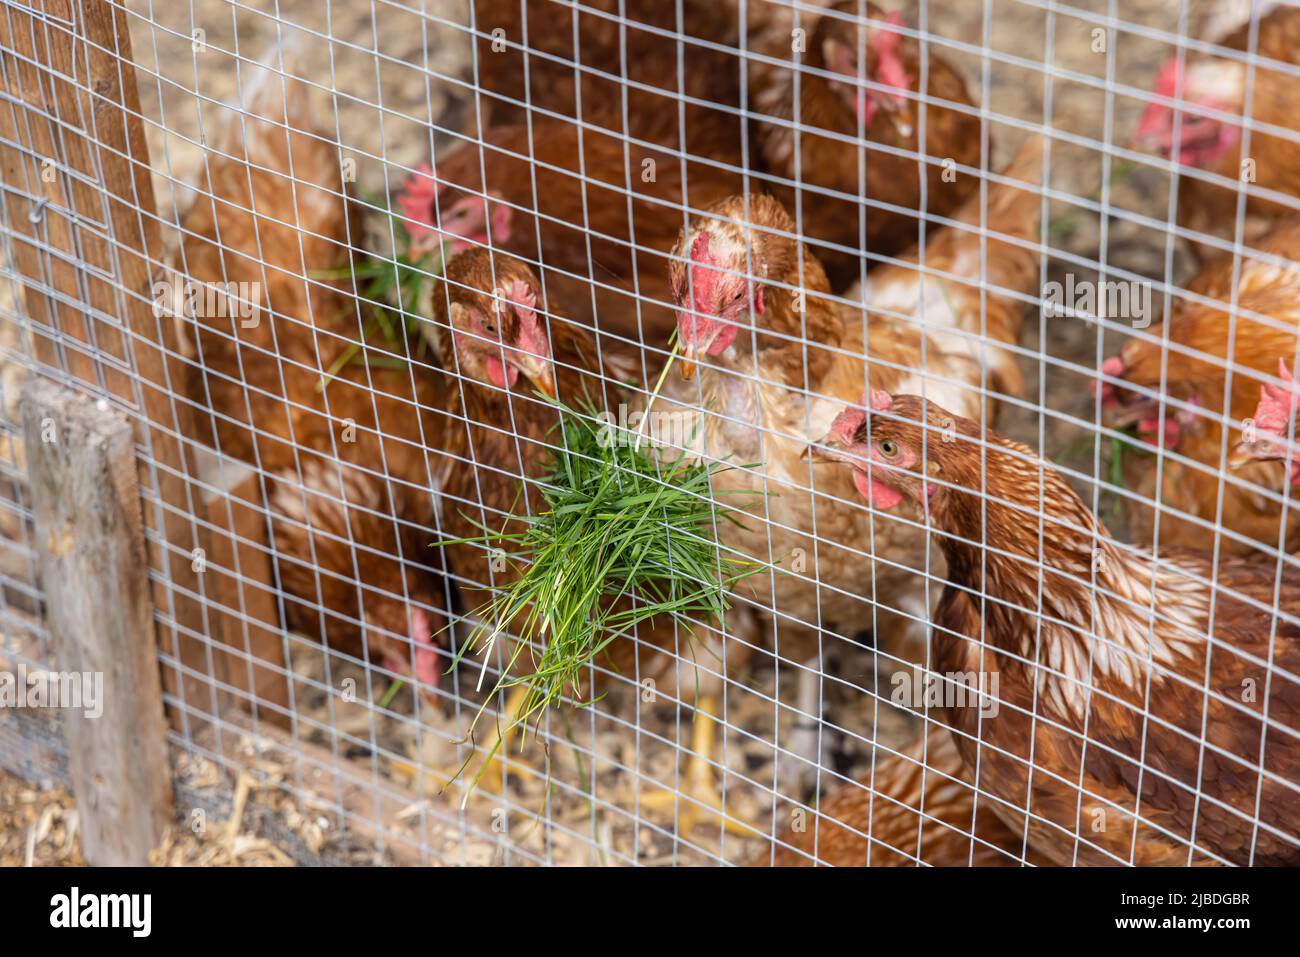 Closeup view on a group of ISA brown hens seen through chicken mesh in a coop. Fresh green blades of grass stick through enclosure at feed time. Stock Photo